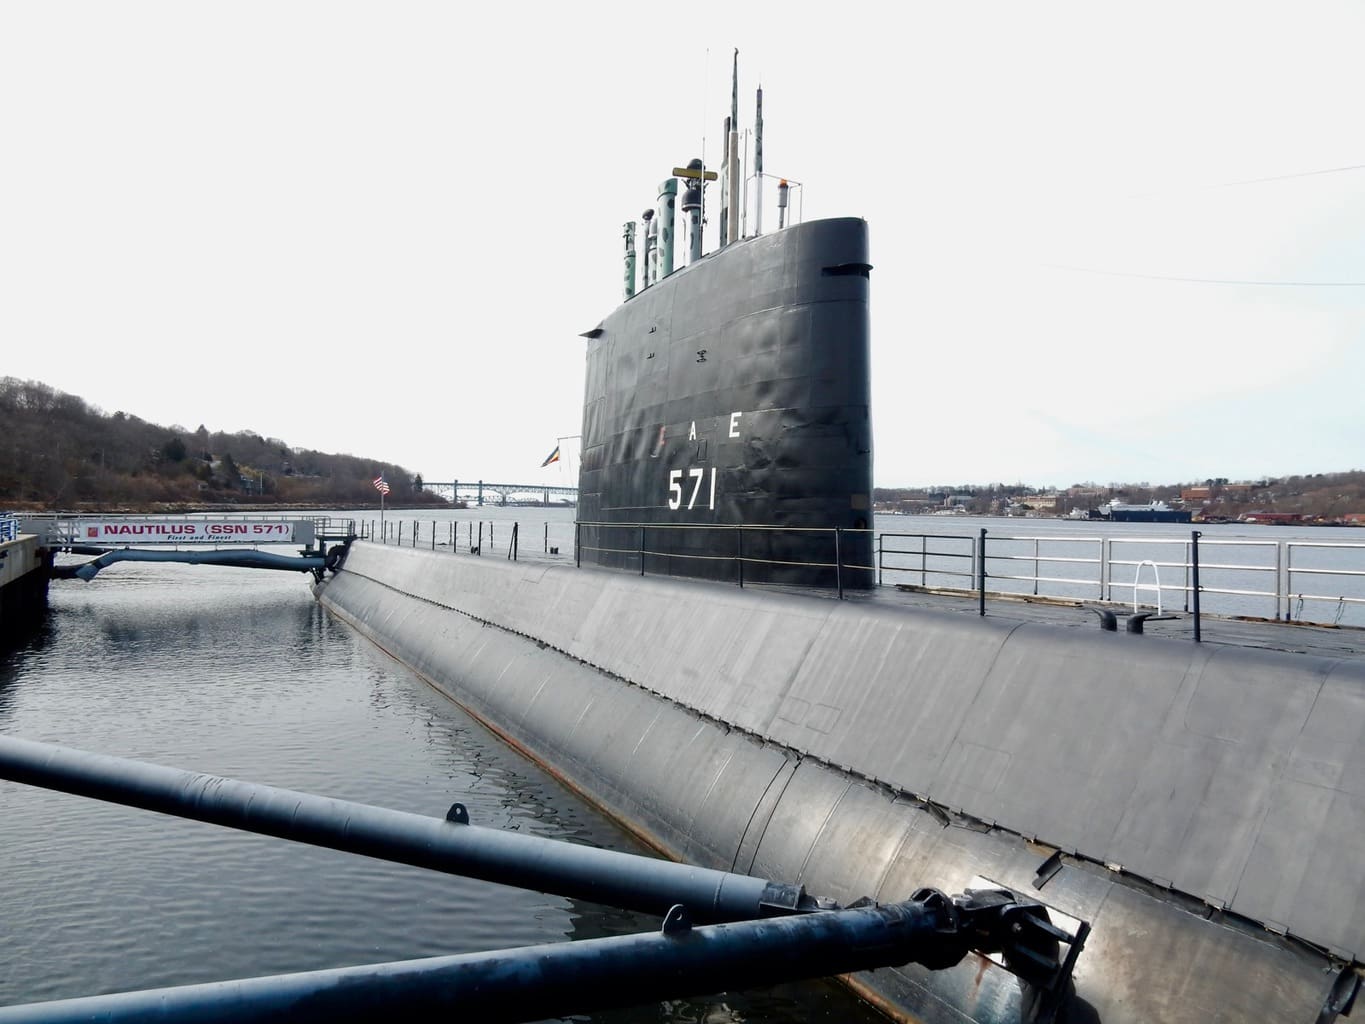 USS Nautilus, World's First Nuclear Powered Submarine, Groton CT